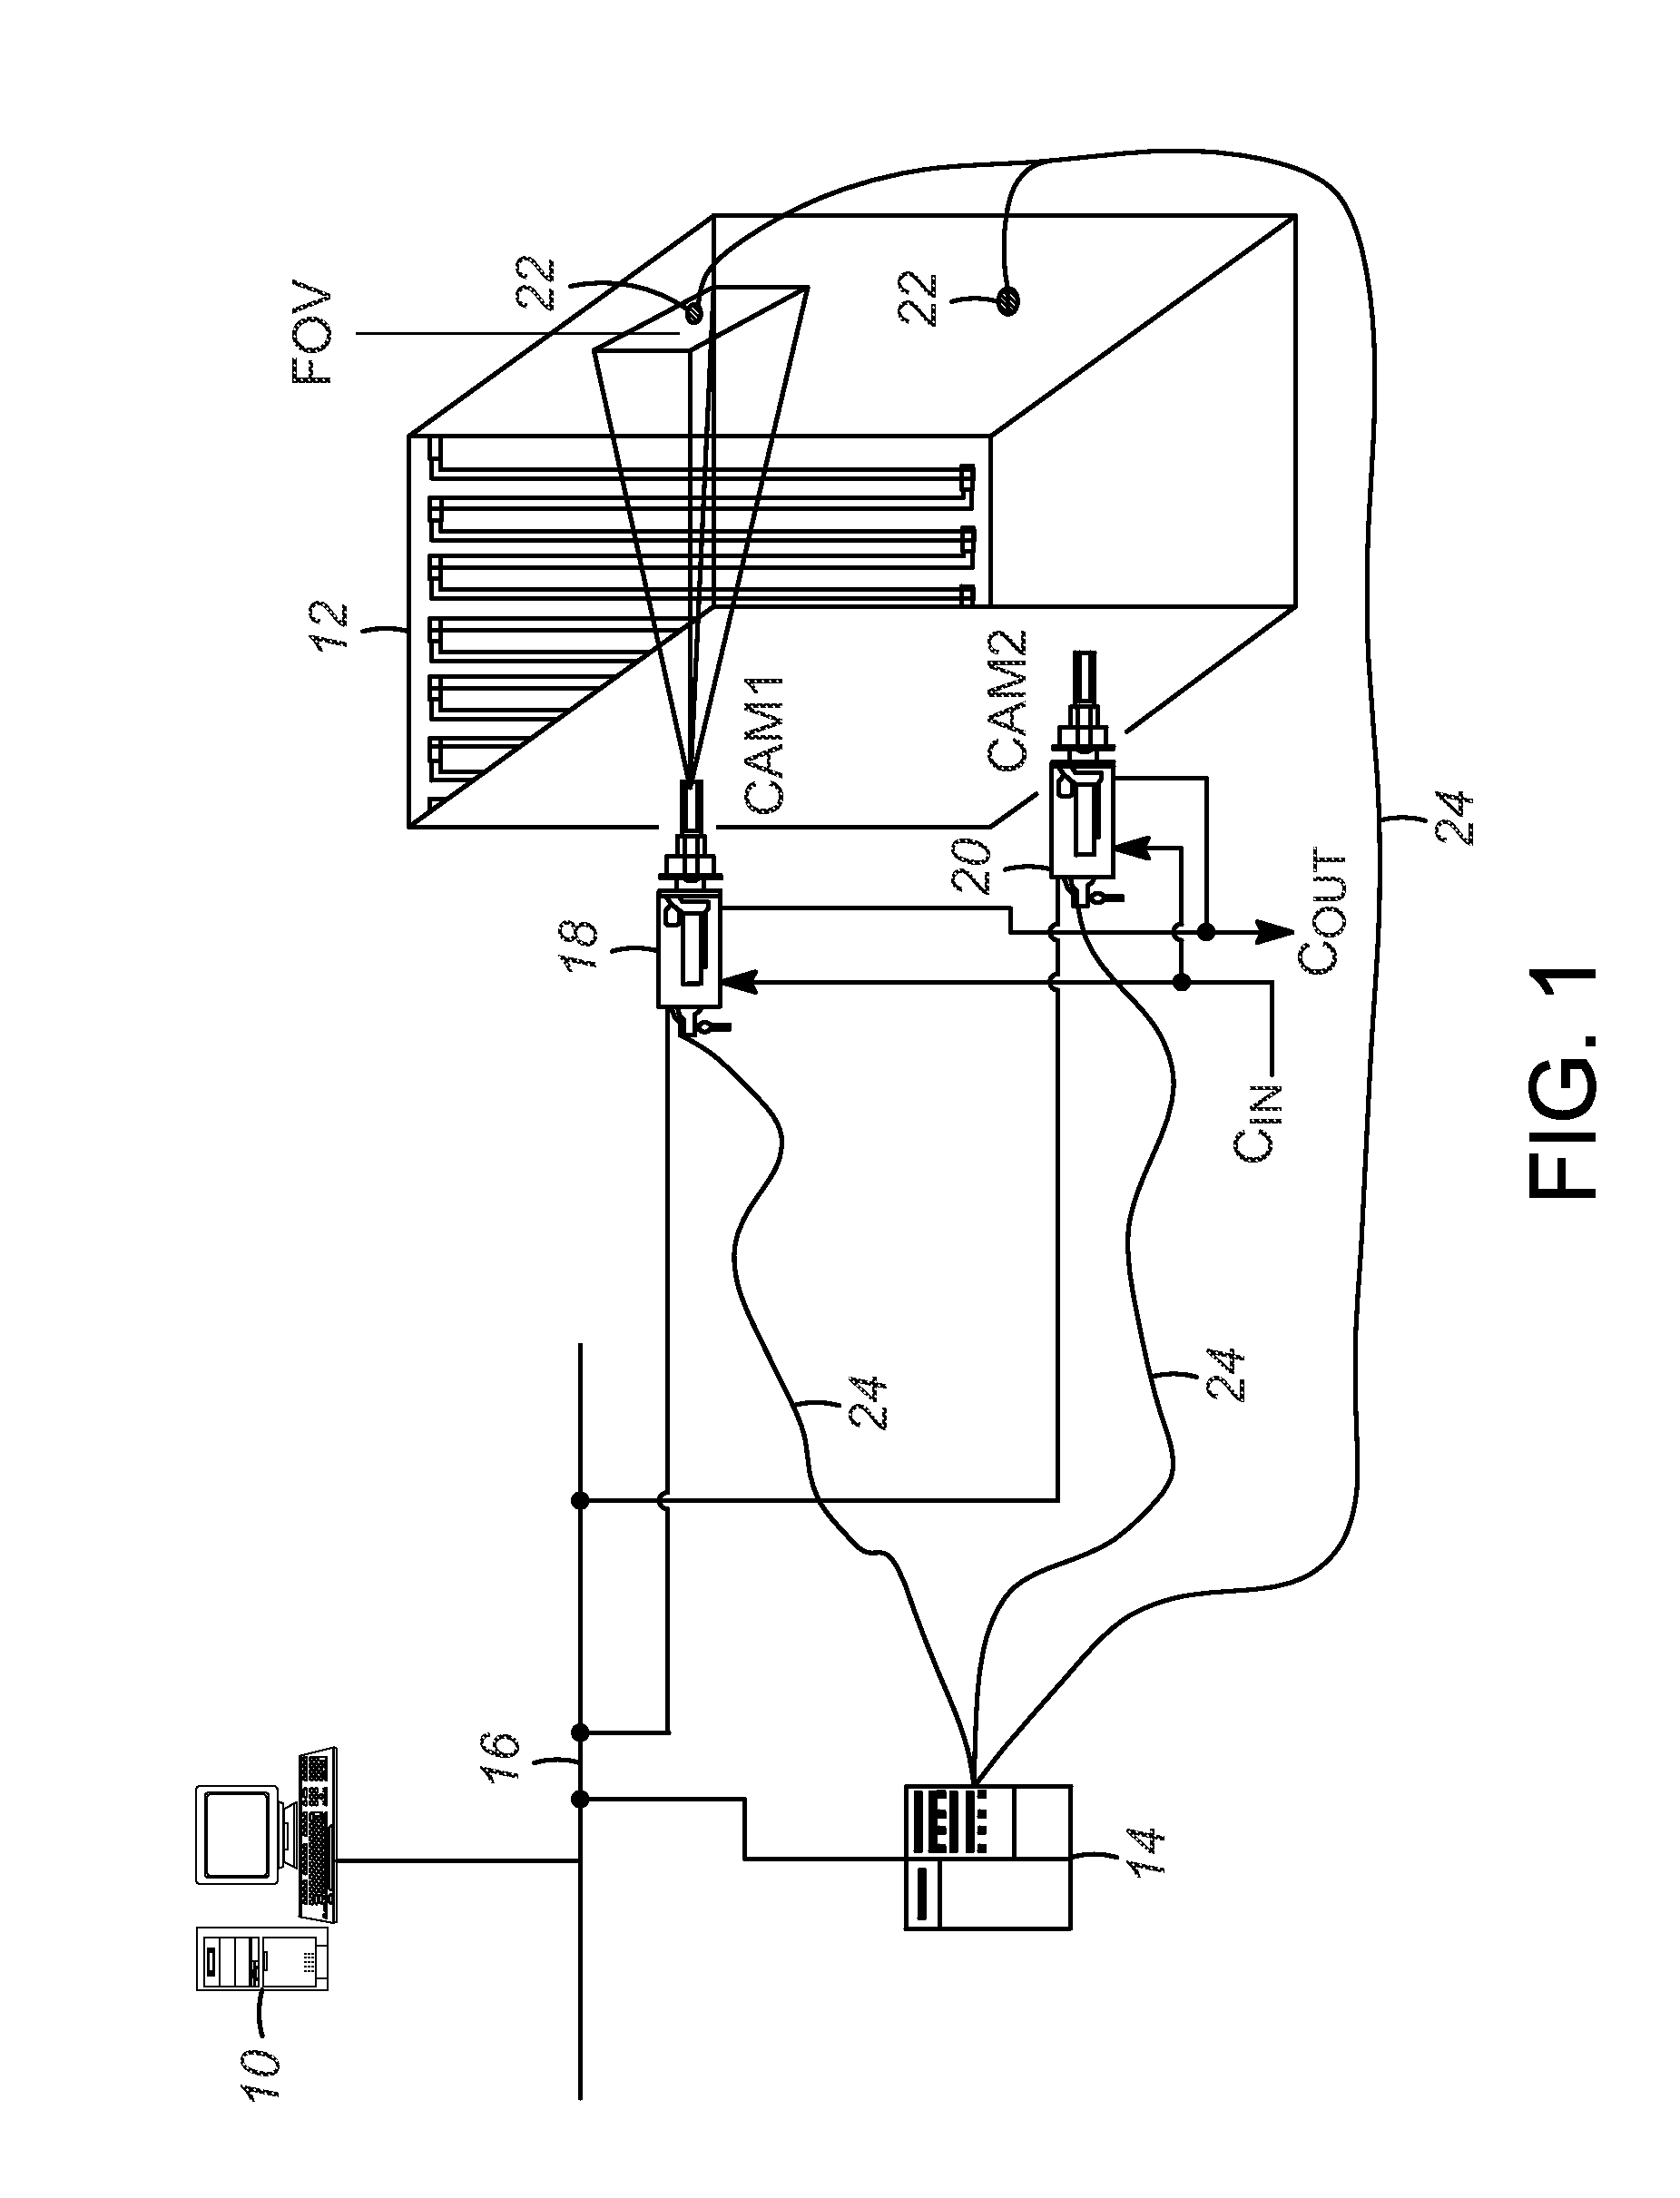 Extended temperature mapping process of a furnace enclosure with multi-spectral image-capturing device